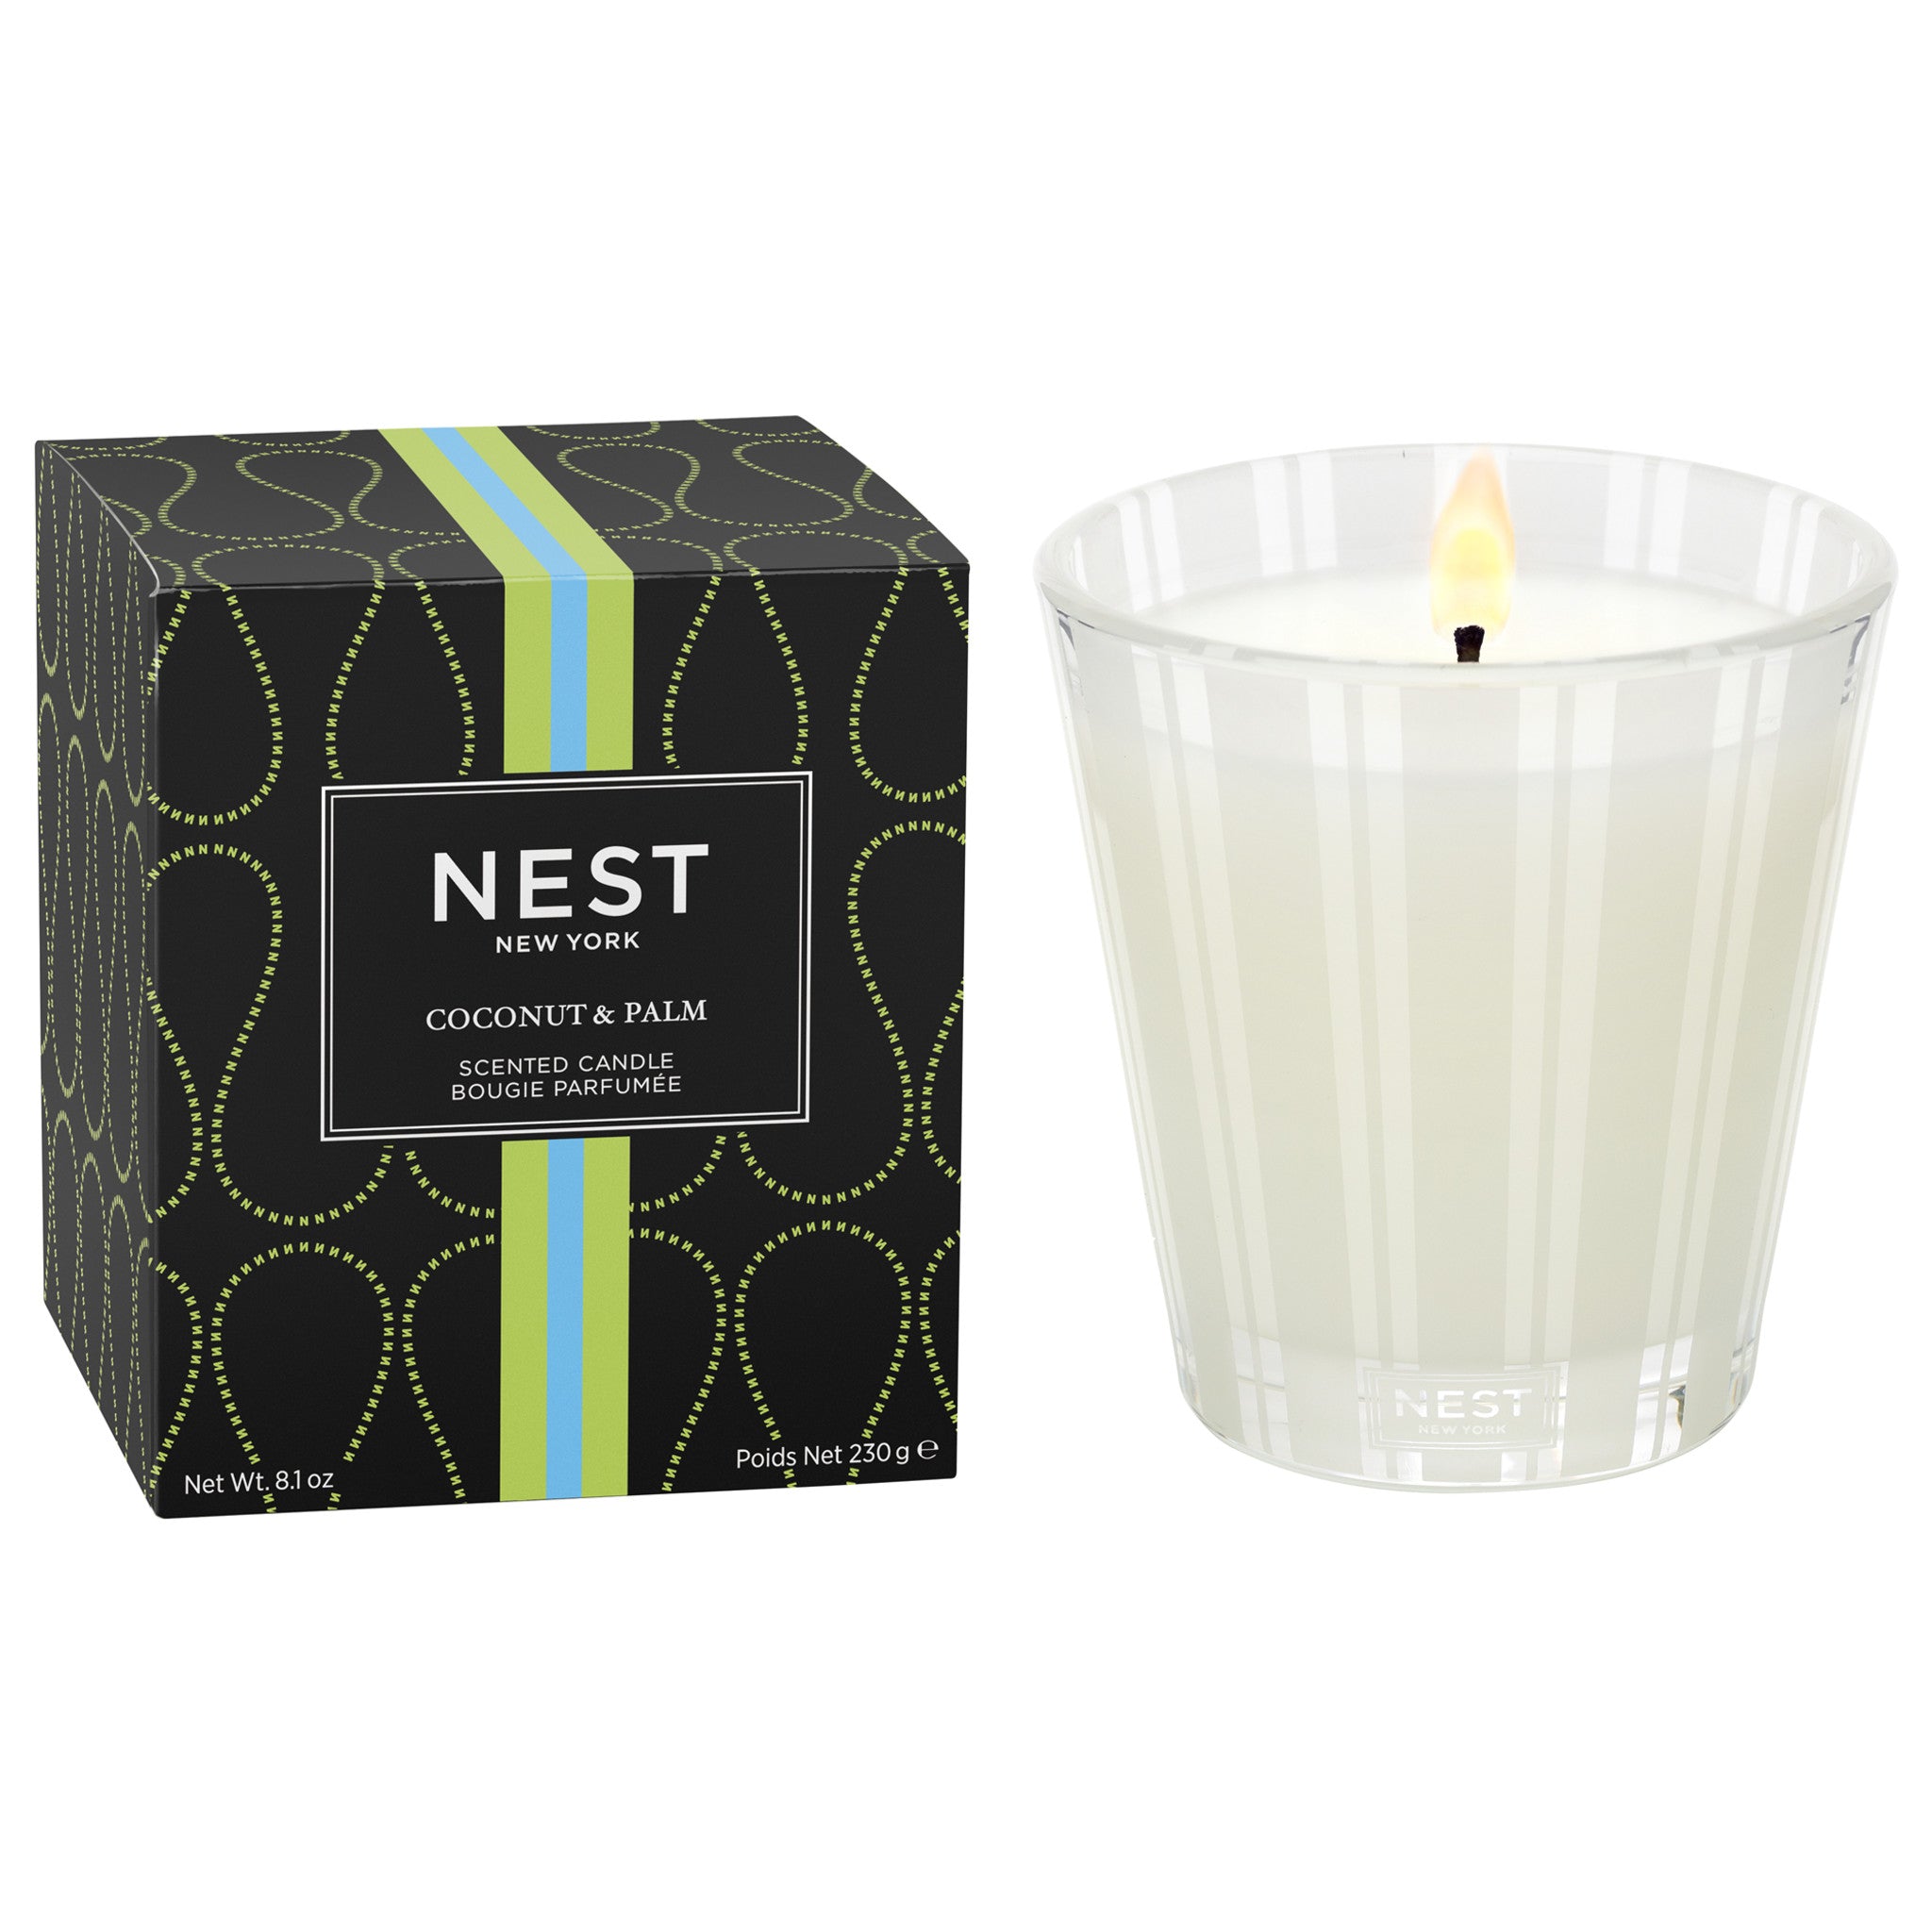 Nest Coconut and Palm Candle Size variant: 8.1 oz (Classic) main image.